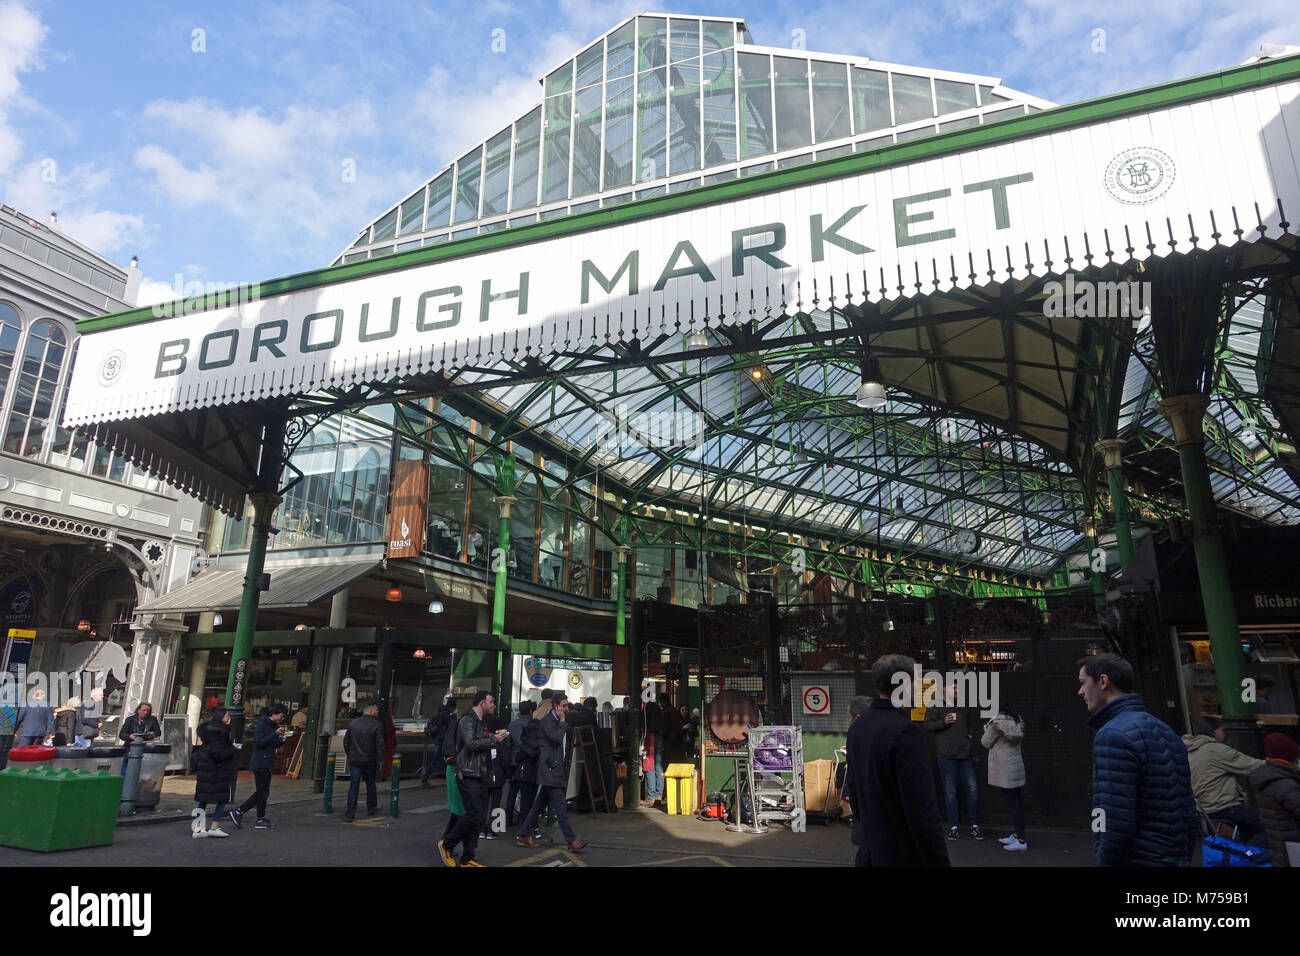 View of the sign over the entrance to Borough Market in London UK Stock Photo